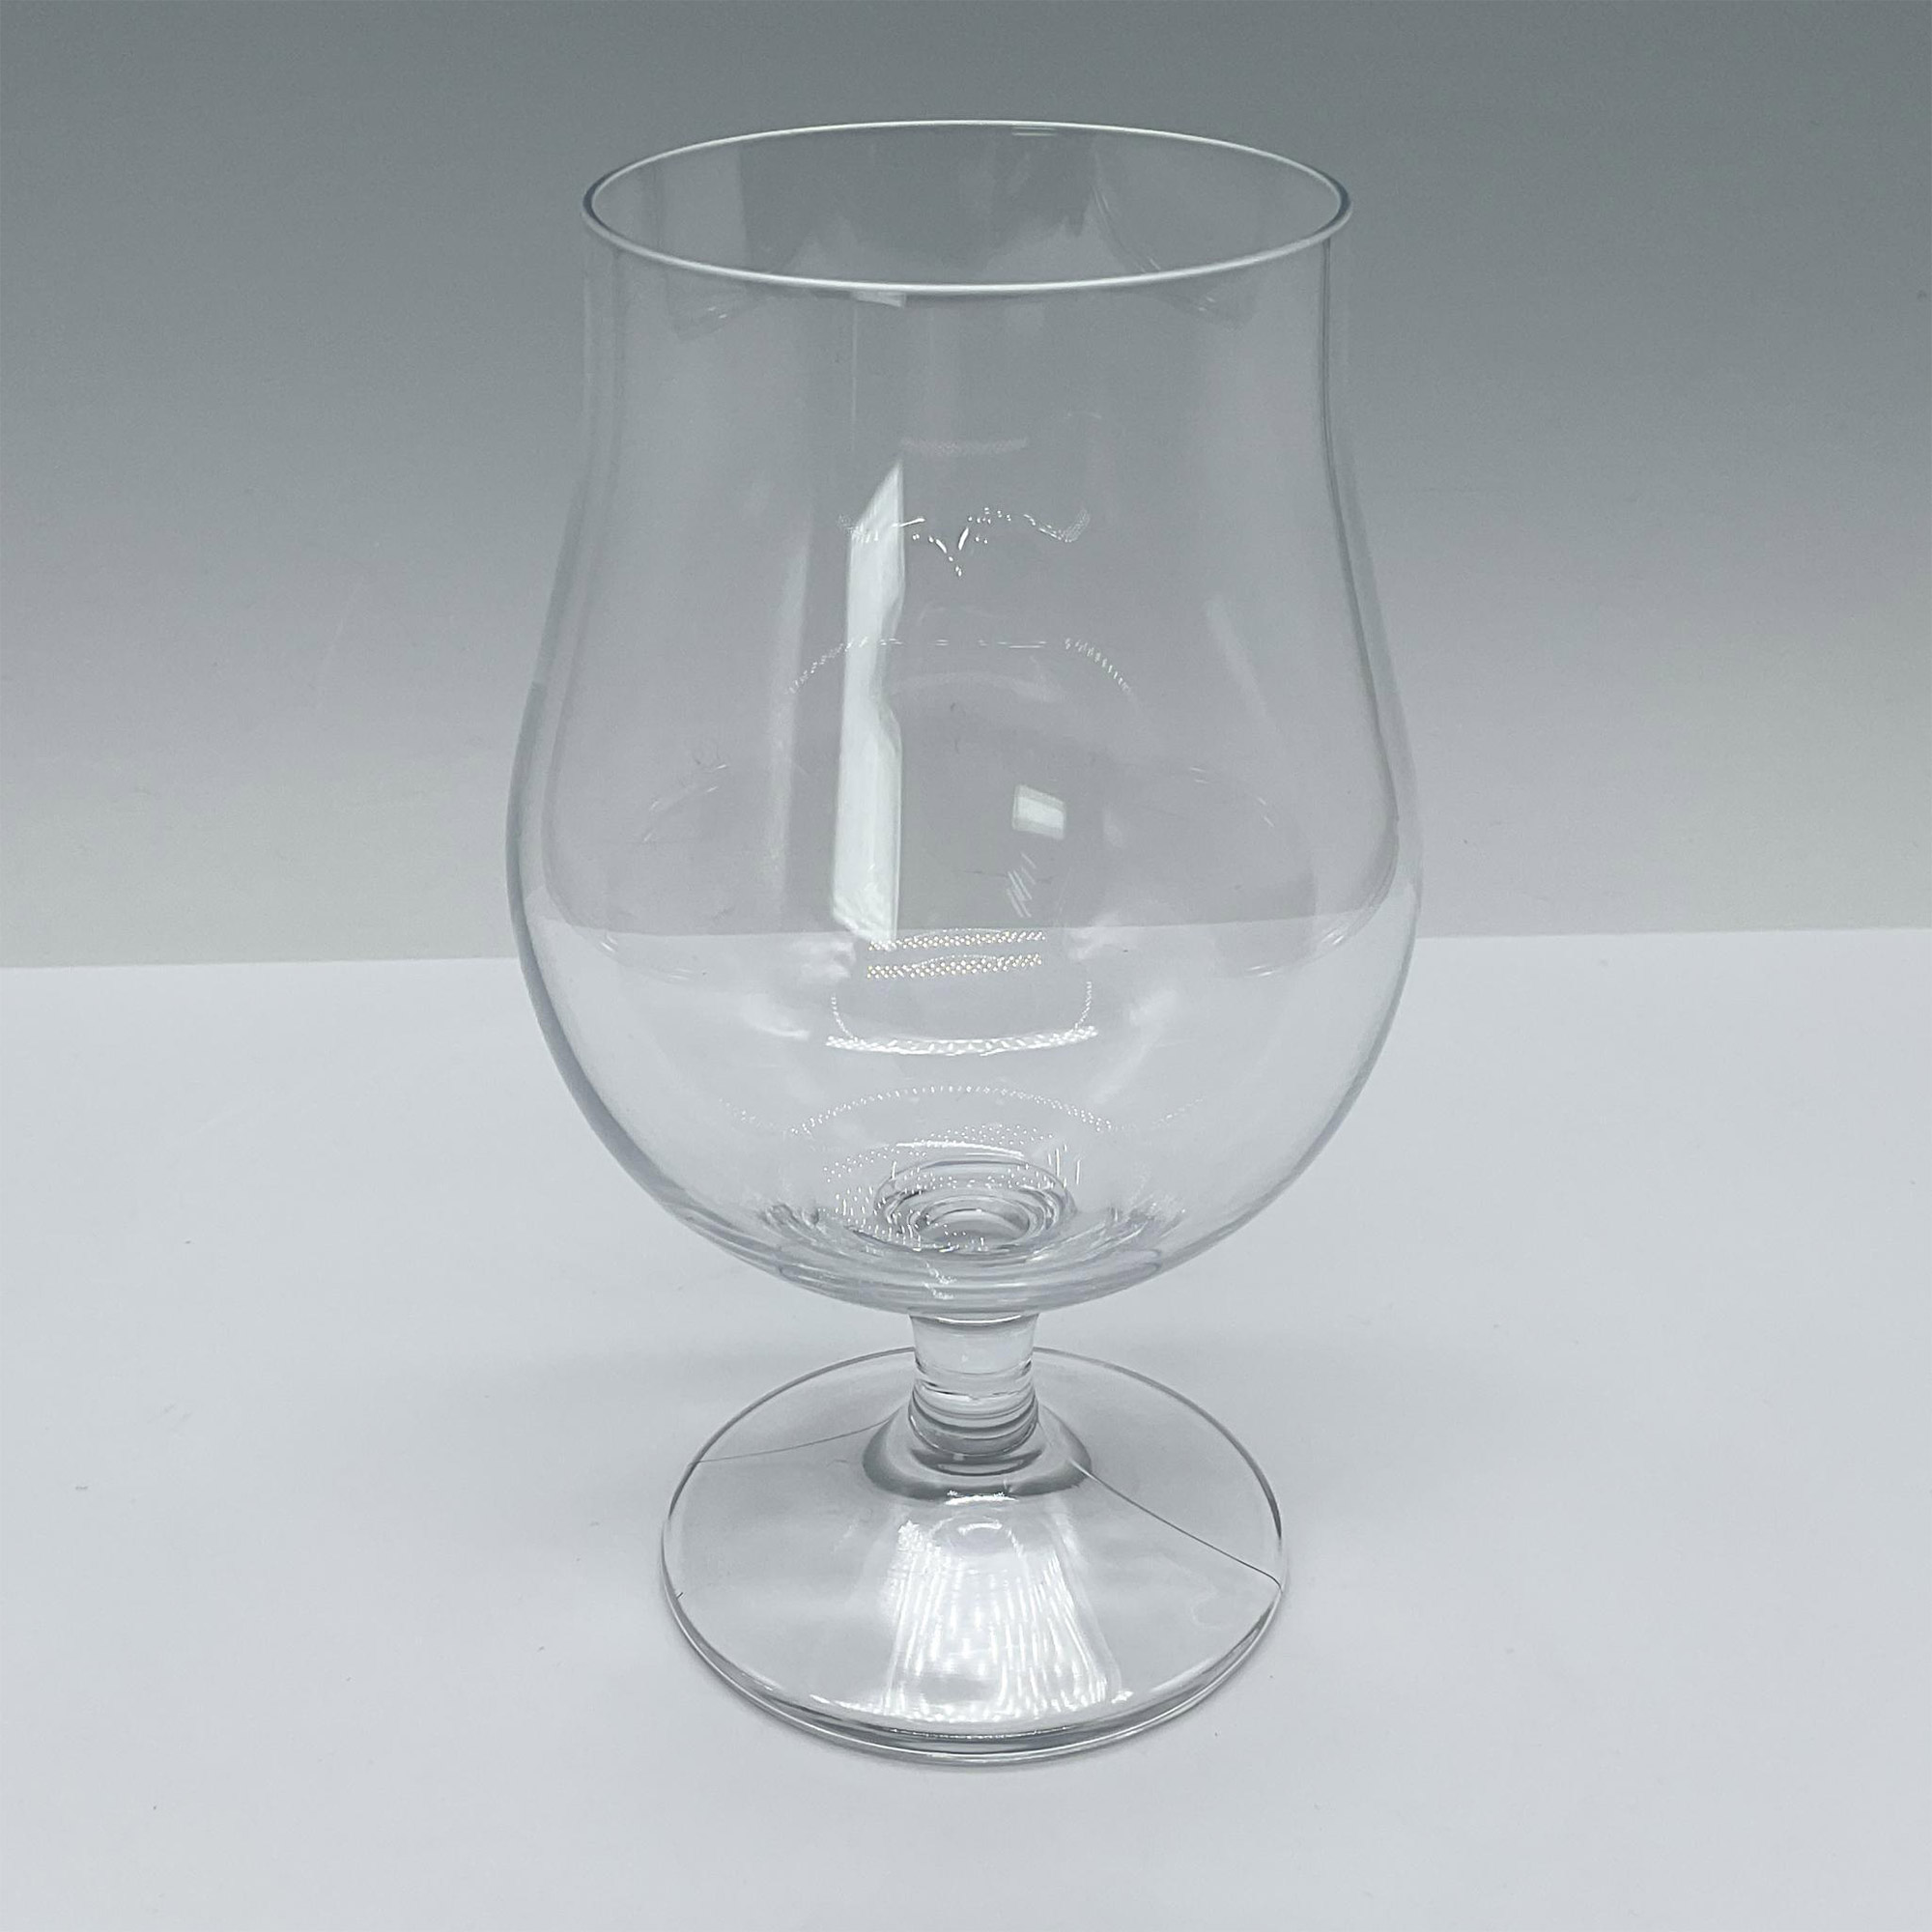 Stolzle Crystal Snifter Glass - Image 2 of 4